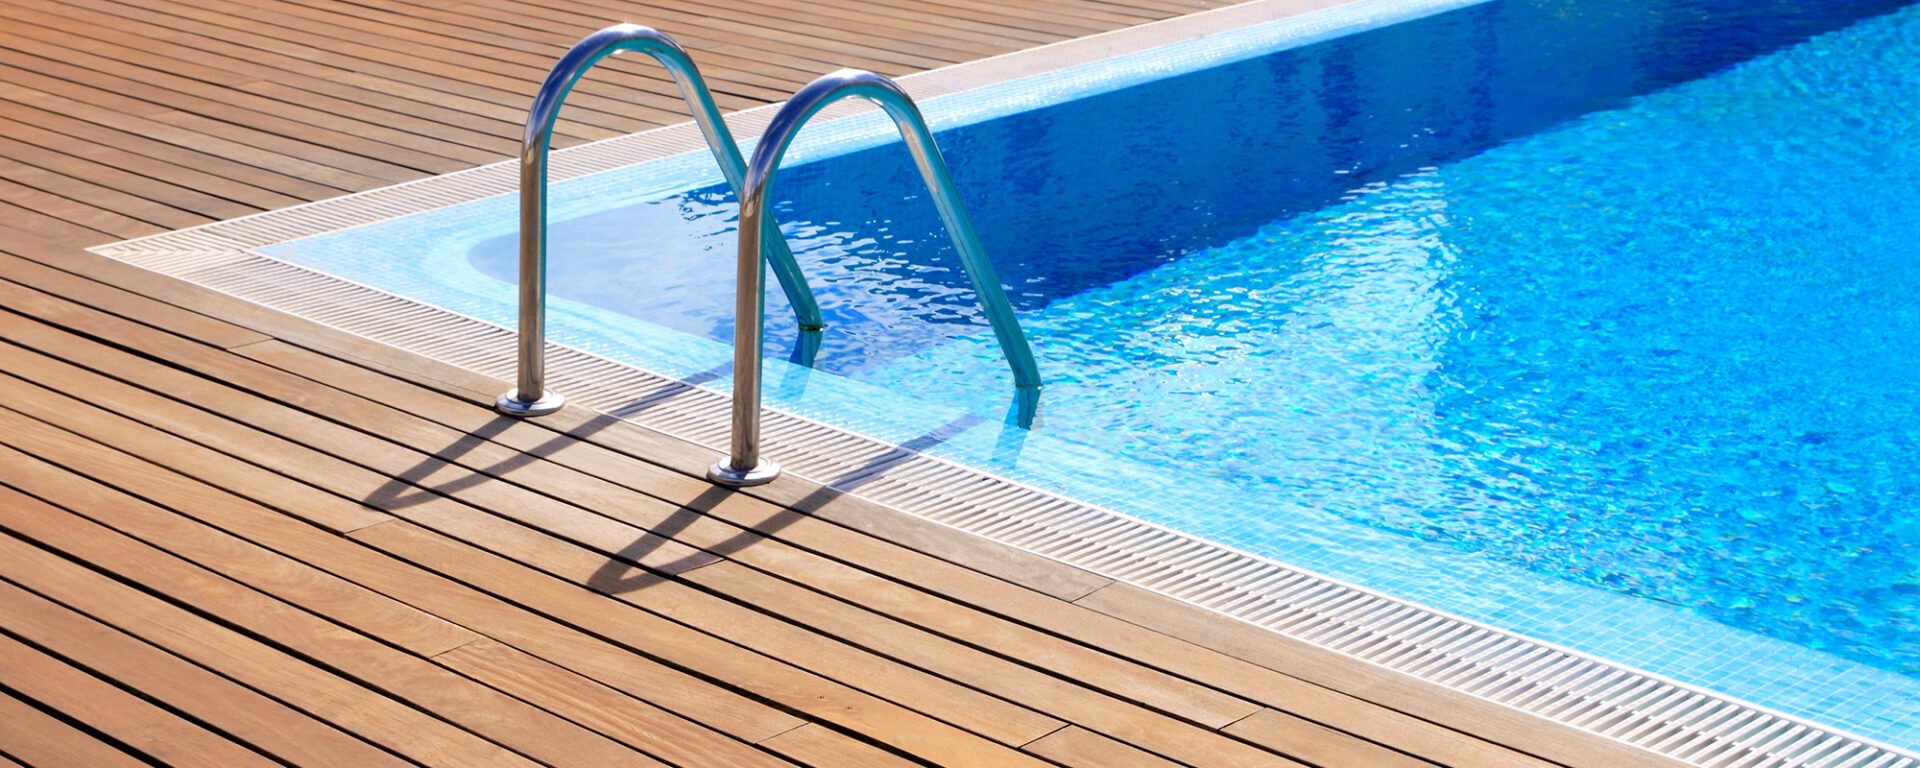 Pool-Deck-Featured